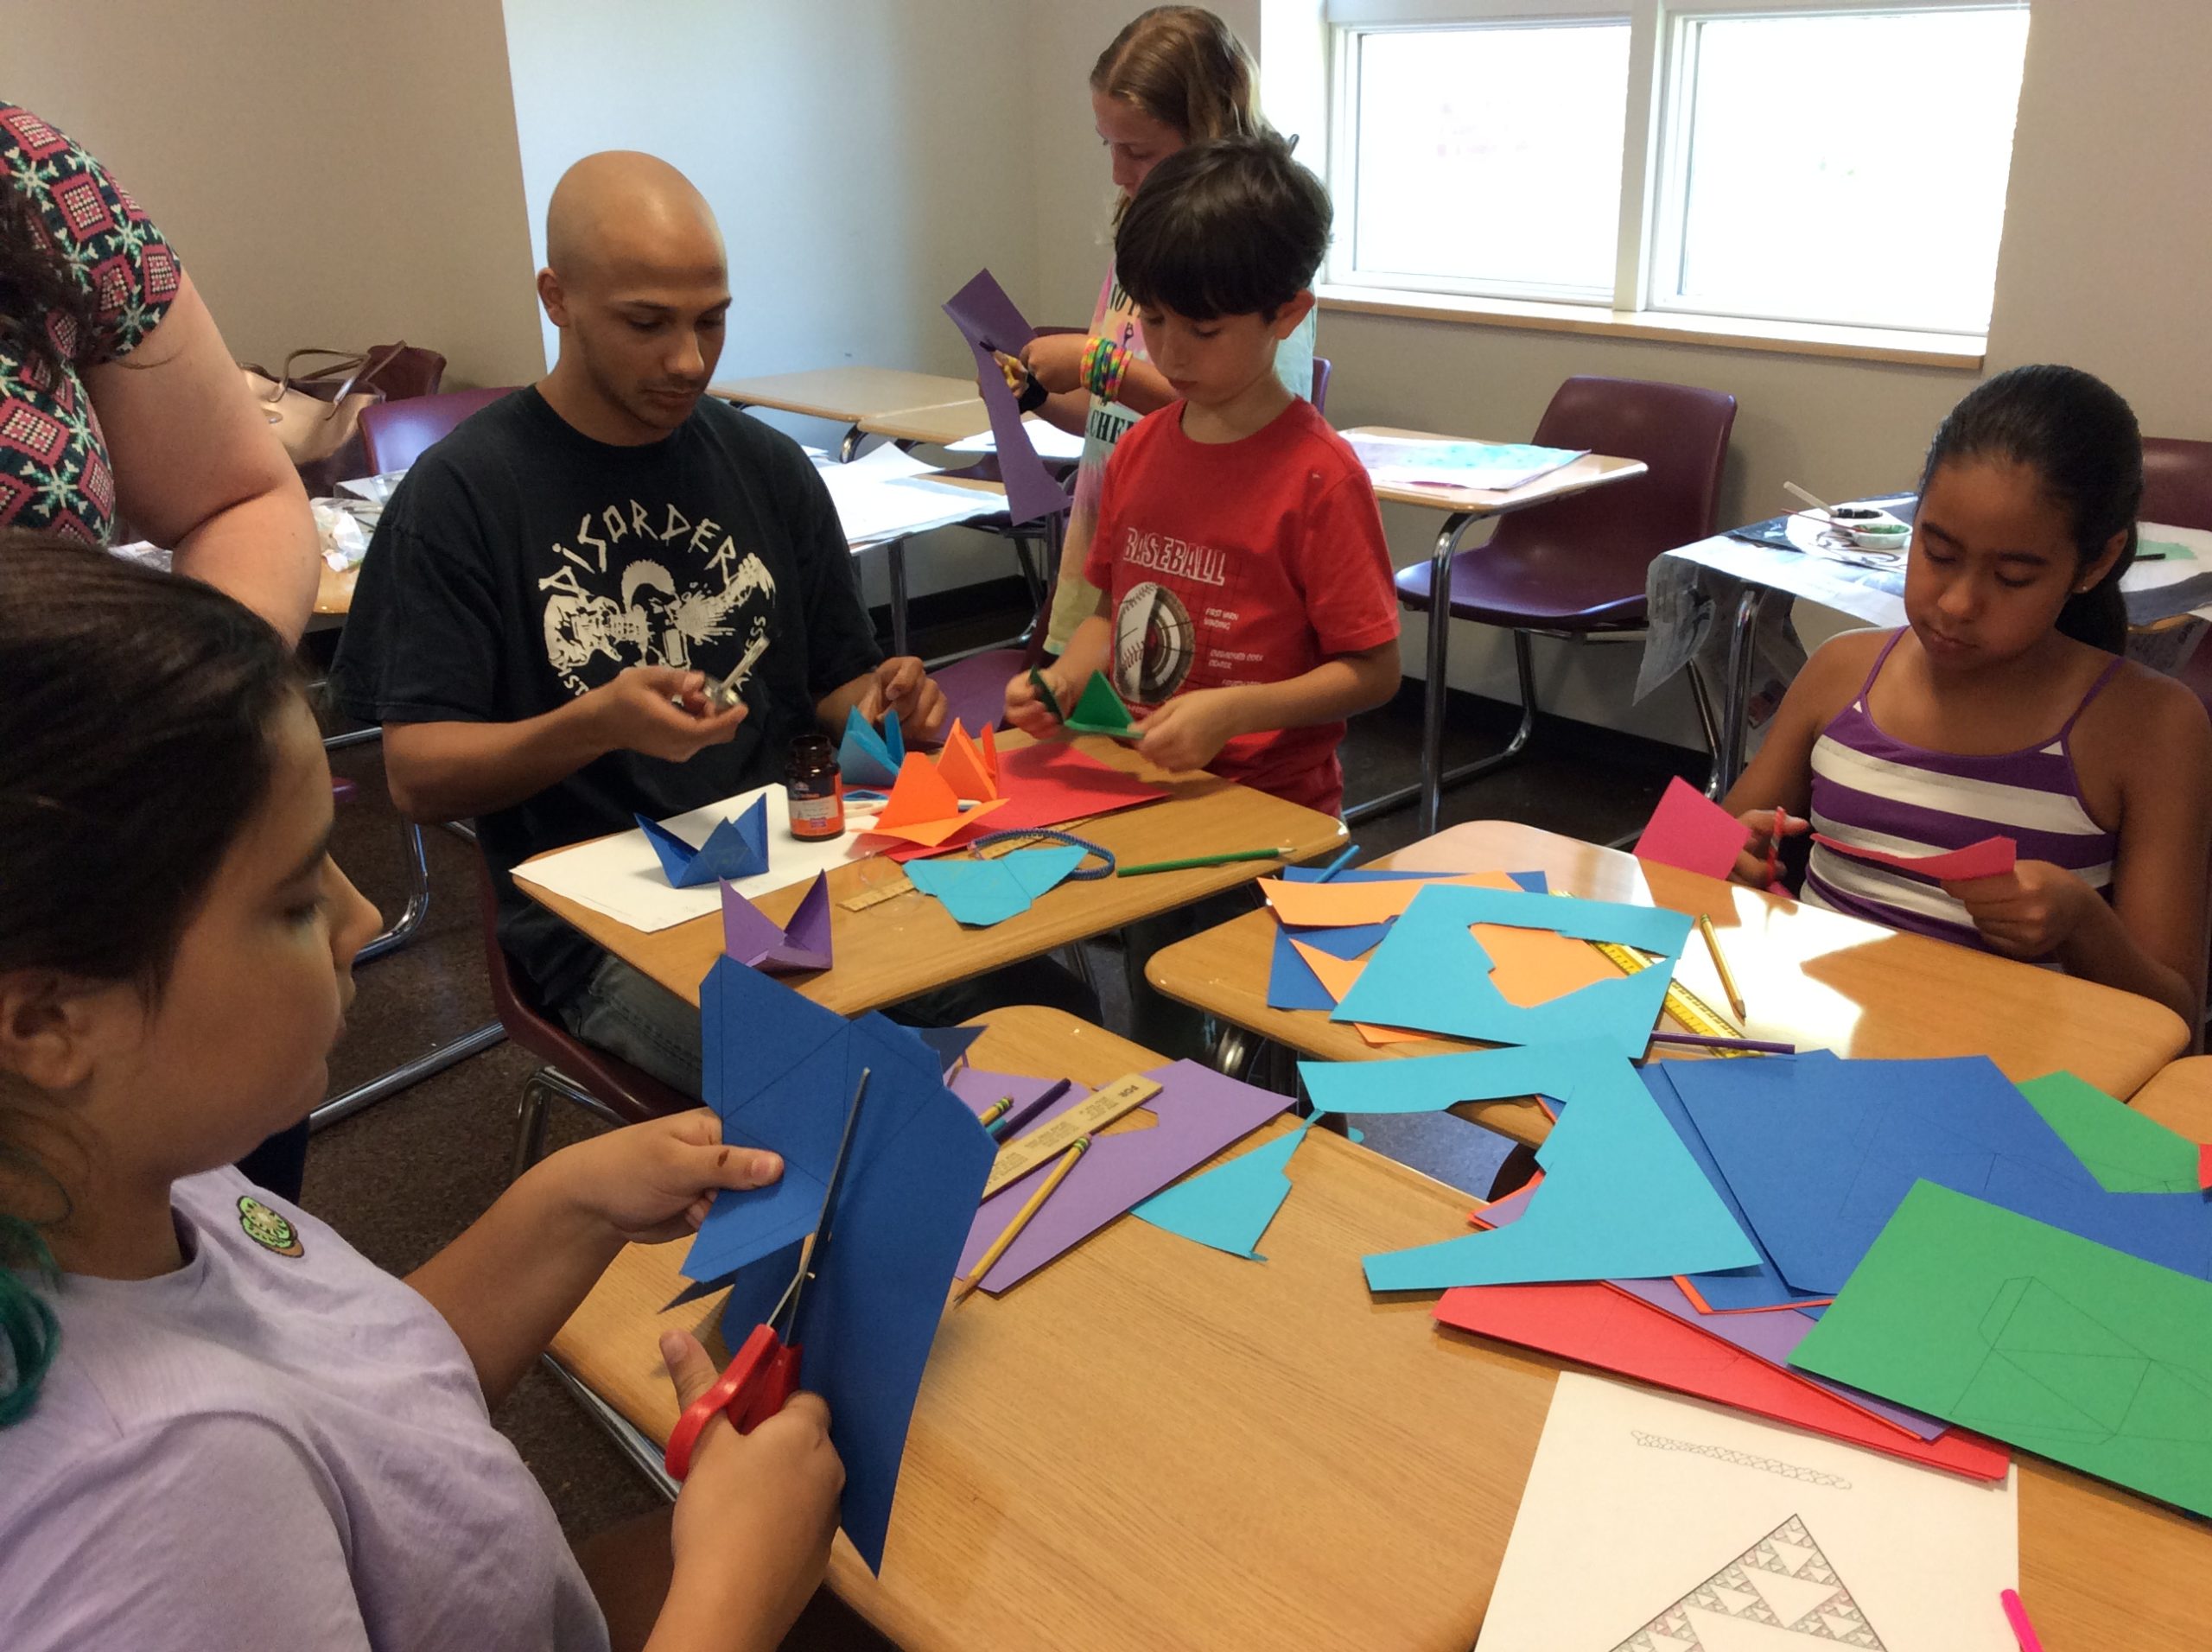 Students and children in a classroom sitting at desks and cutting shapes from papers of different color.